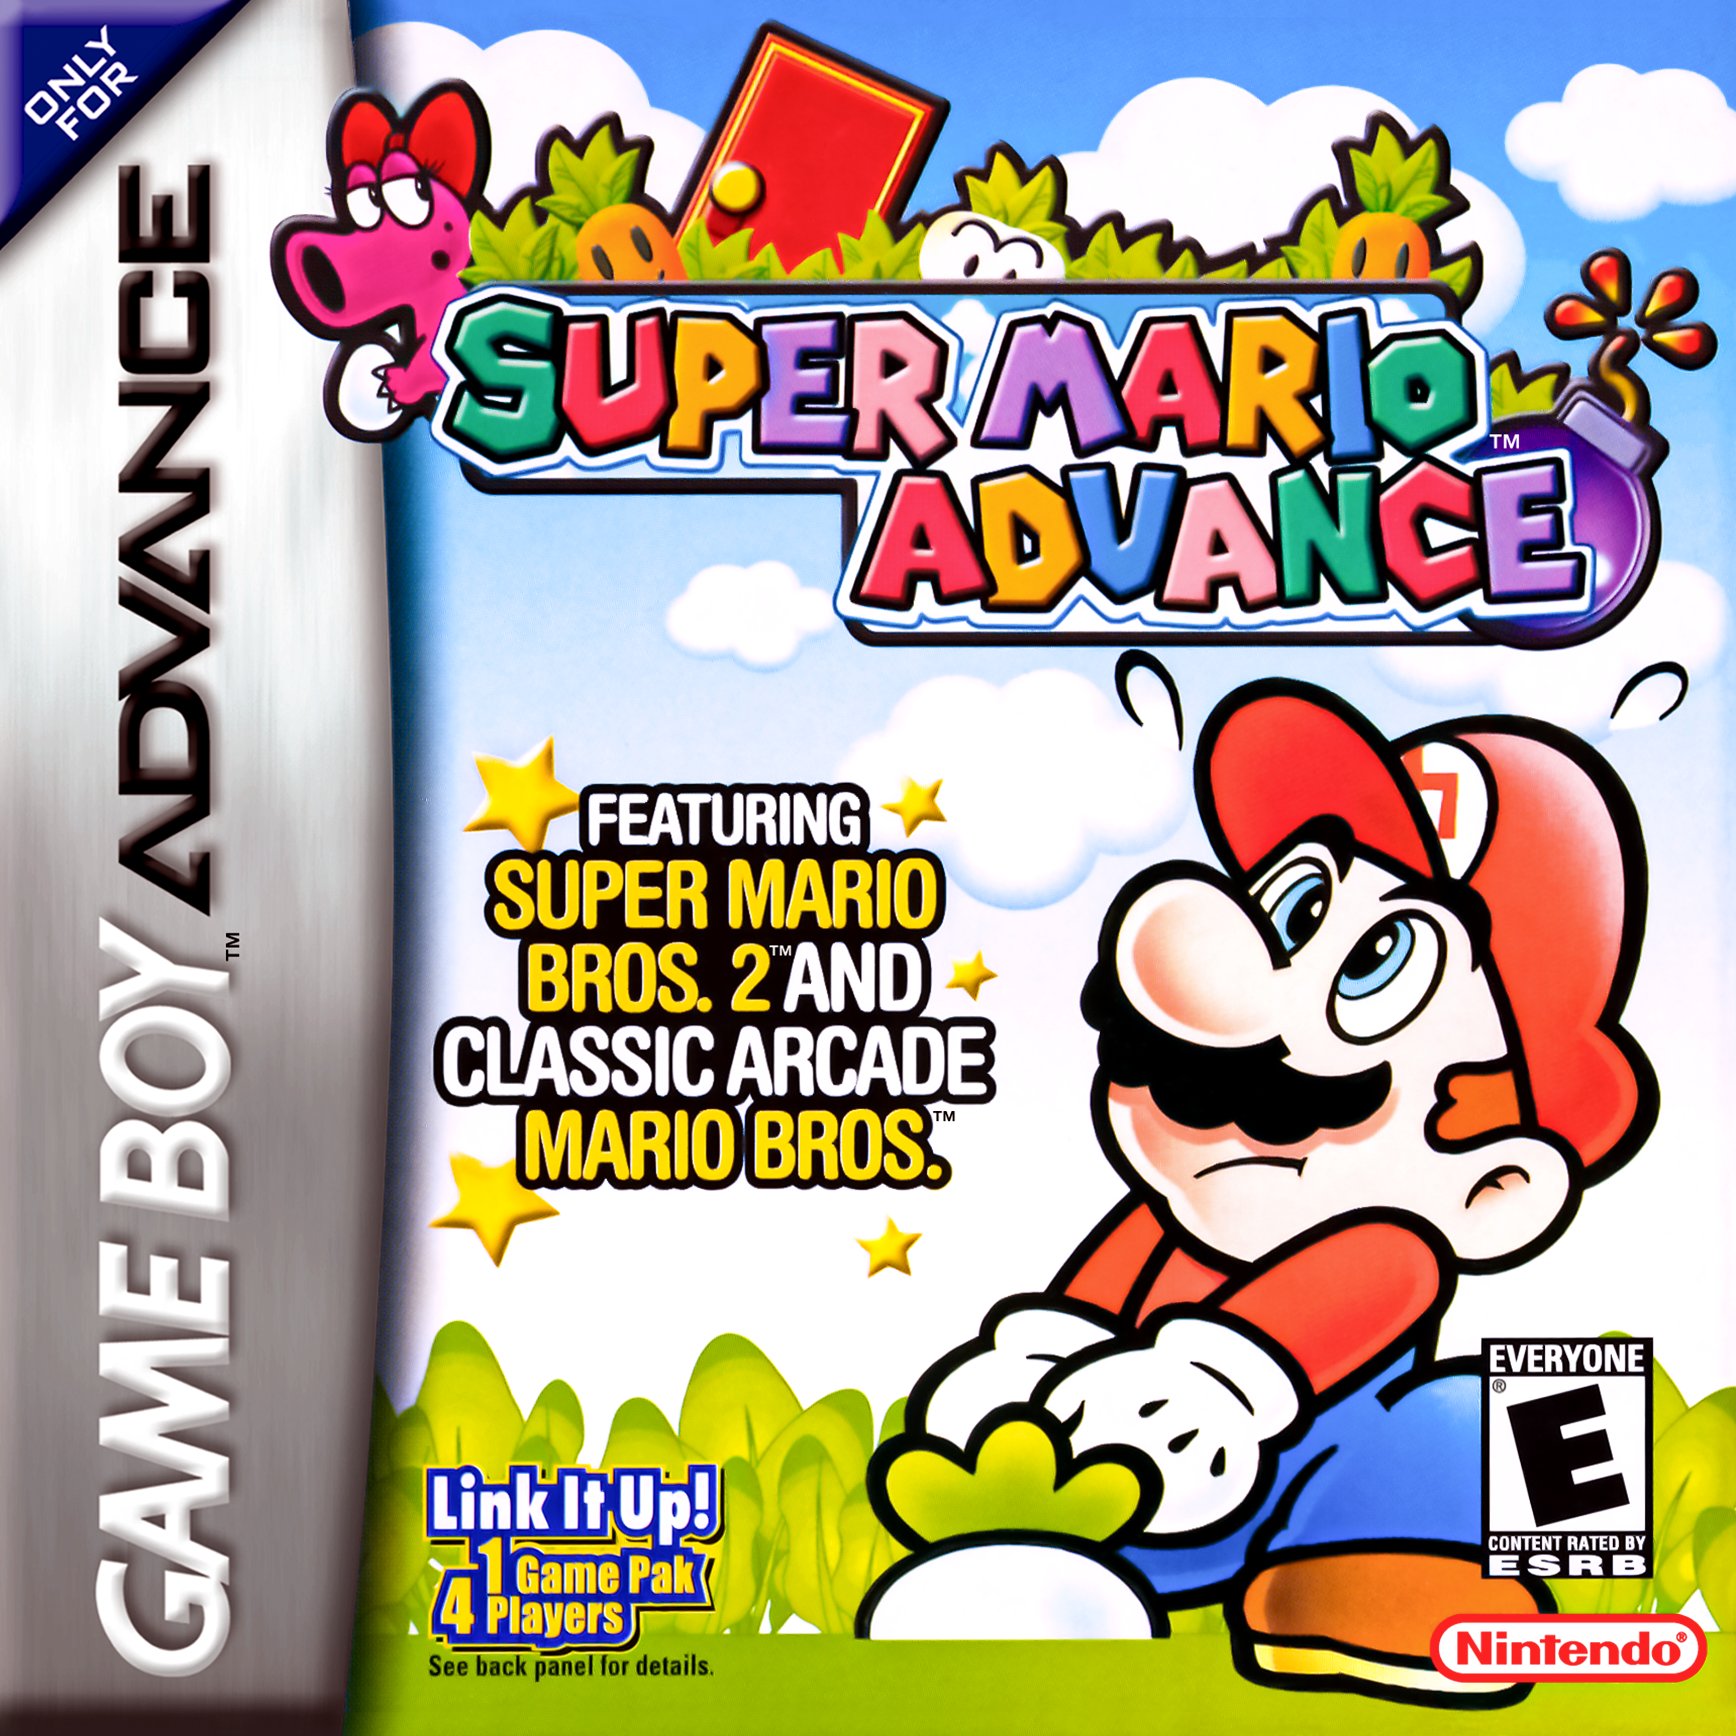 Game Boy Advance – May 2023 Game Updates – Nintendo Switch Online +  Expansion Pack 